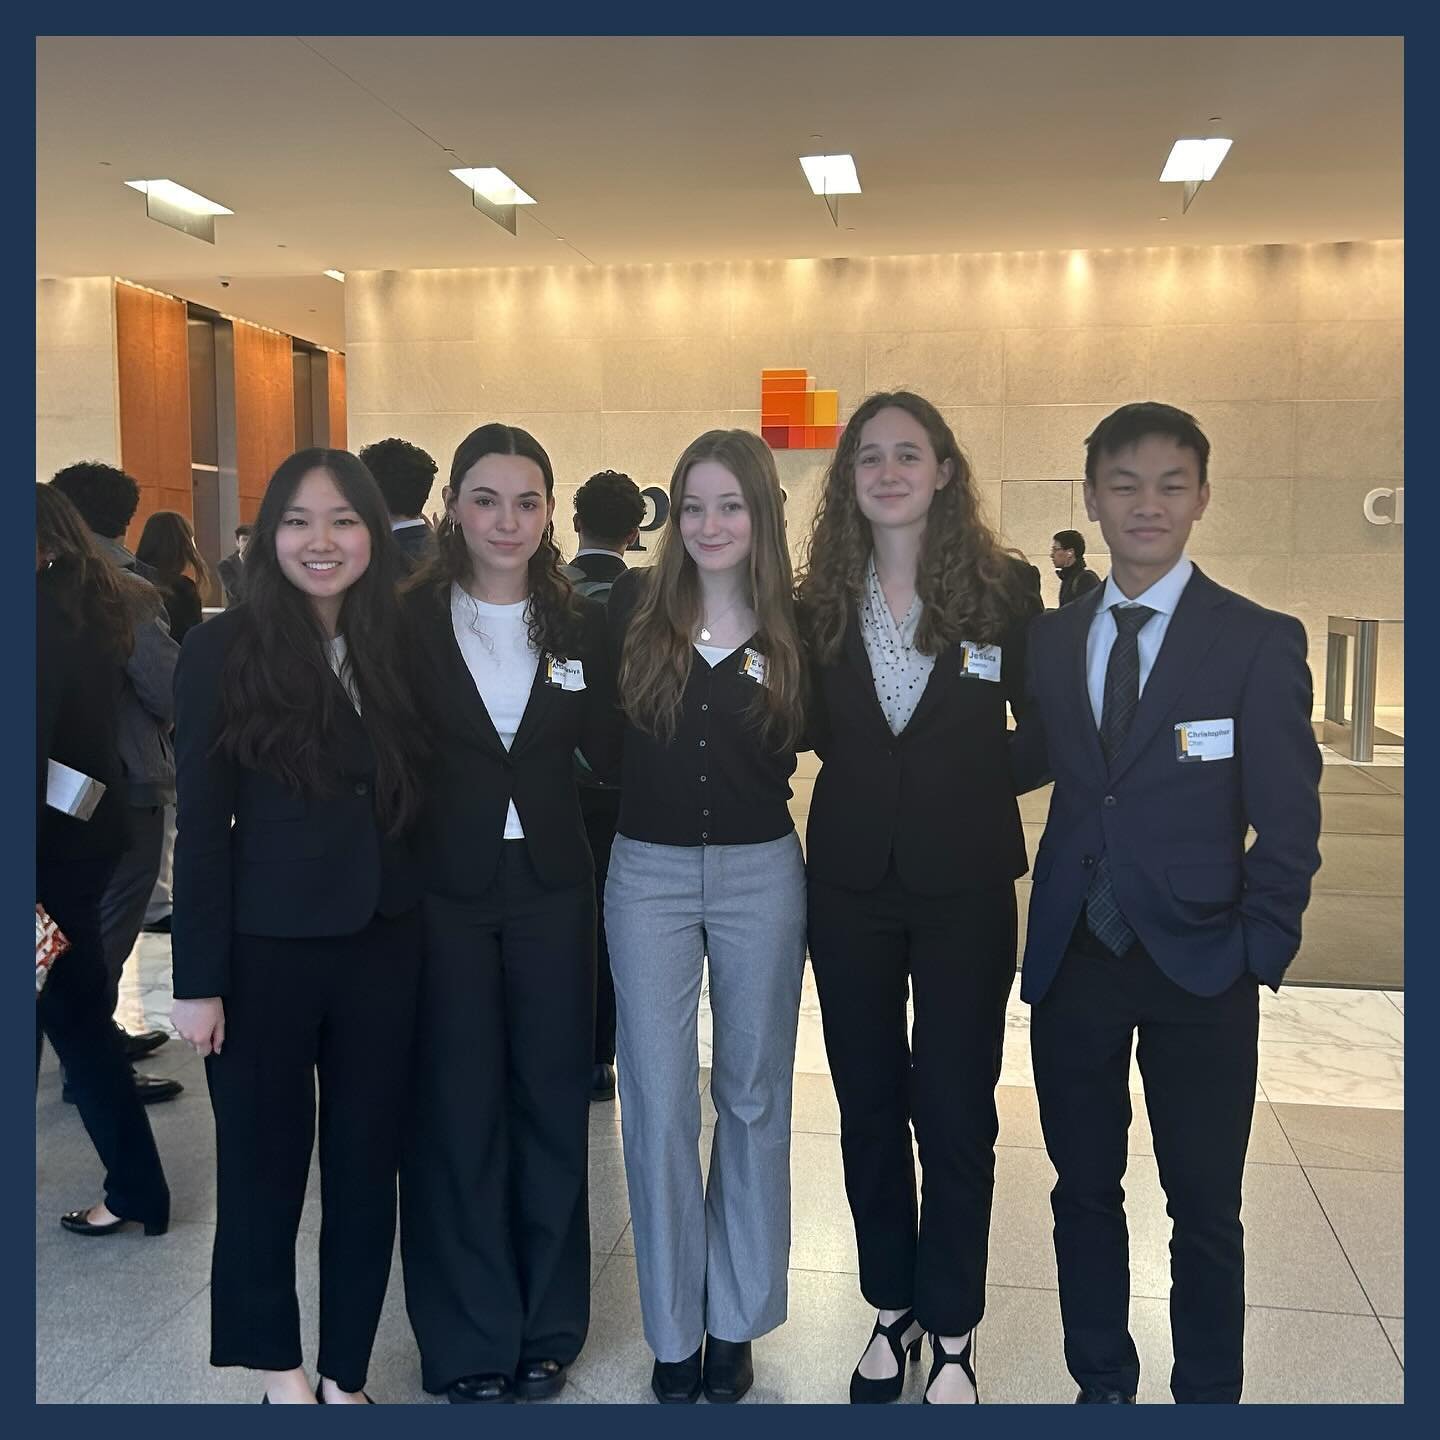 This past Friday, the Consulting Development Program had their Capstone Case finals at PwC offices in New York City, with team Canvas Consulting; Jessica Chernov, Christopher Chin, Vienna Du, Noah Hoch, and Anastasiya Sereda winning first place with 